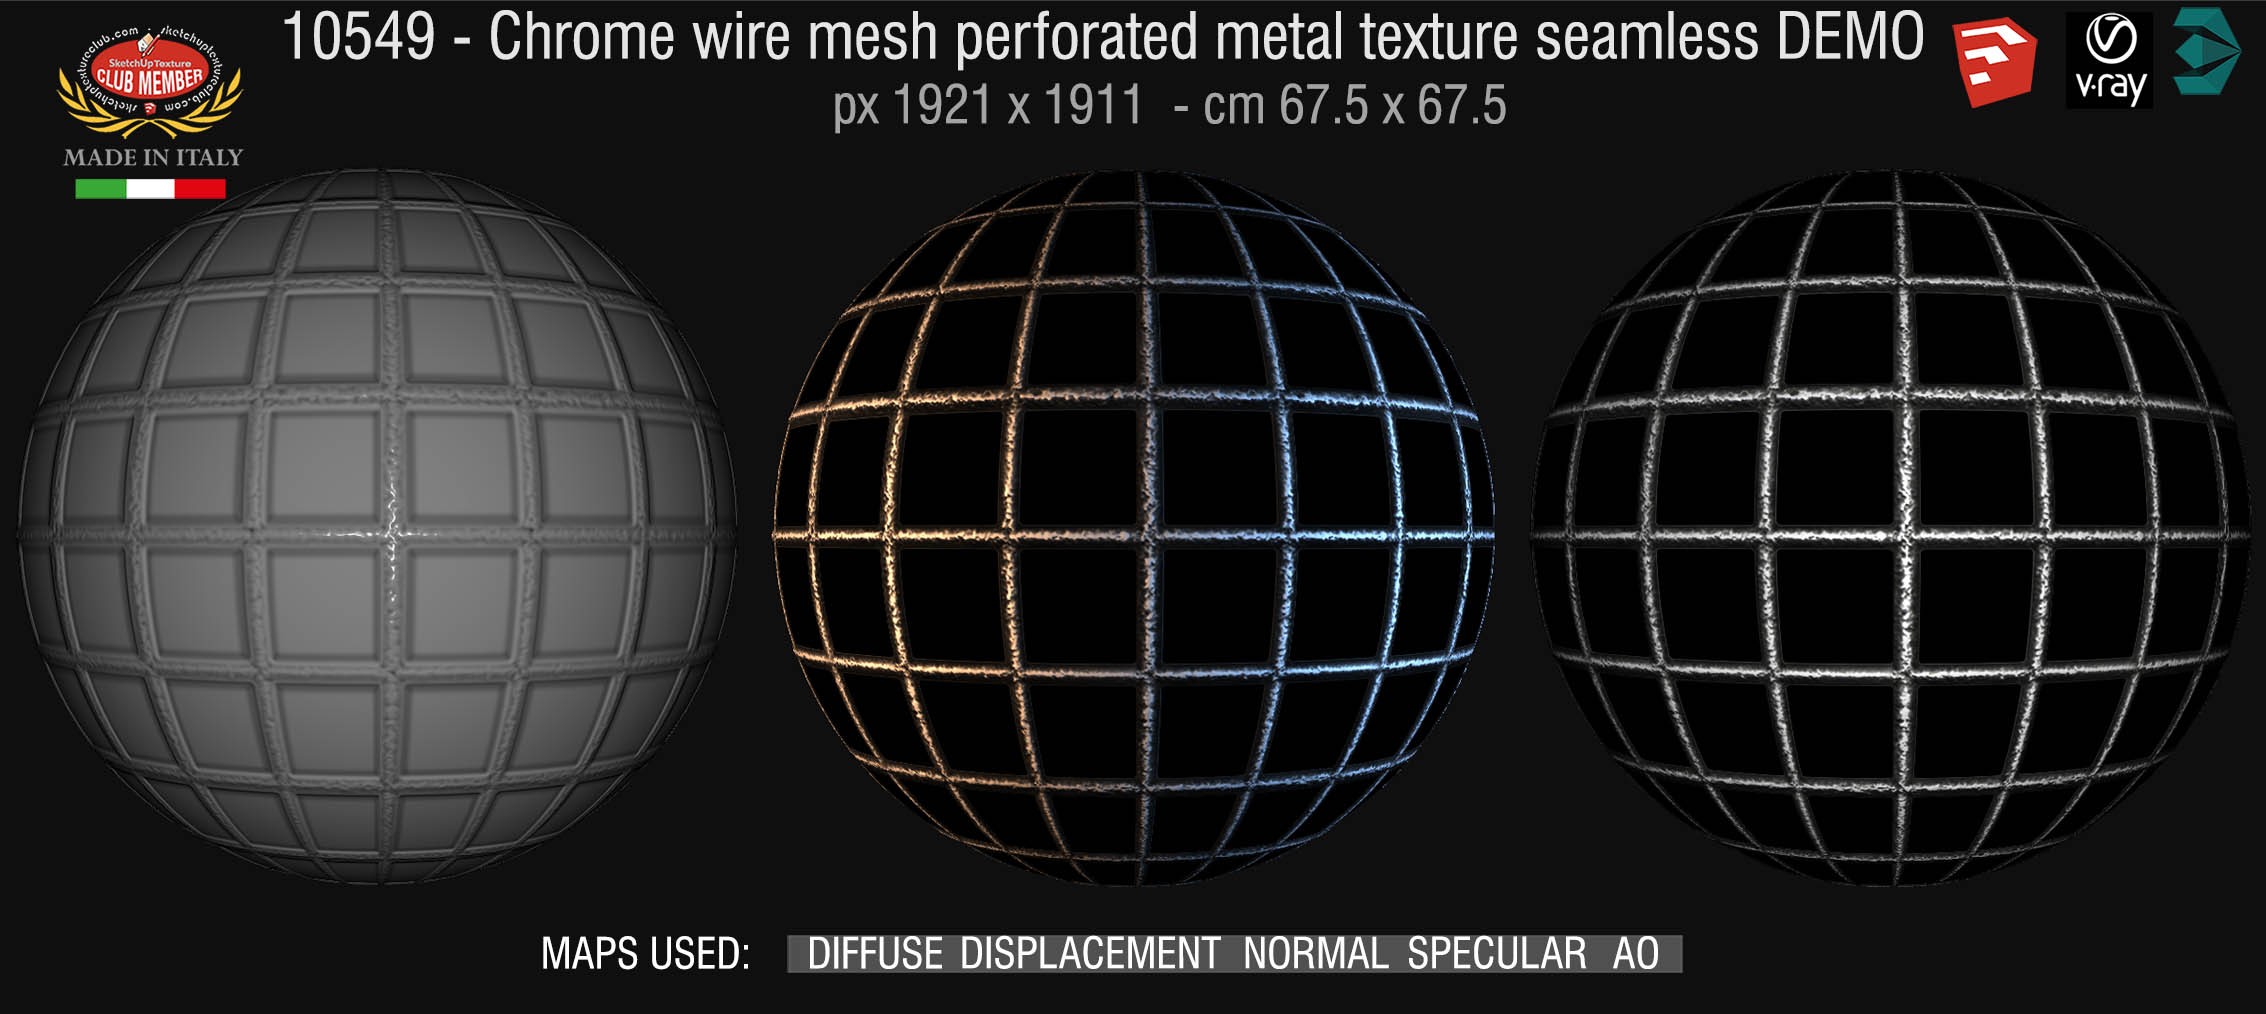 10549 HR Chrome wire mesh perforate metal texture seamless + maps DEMO